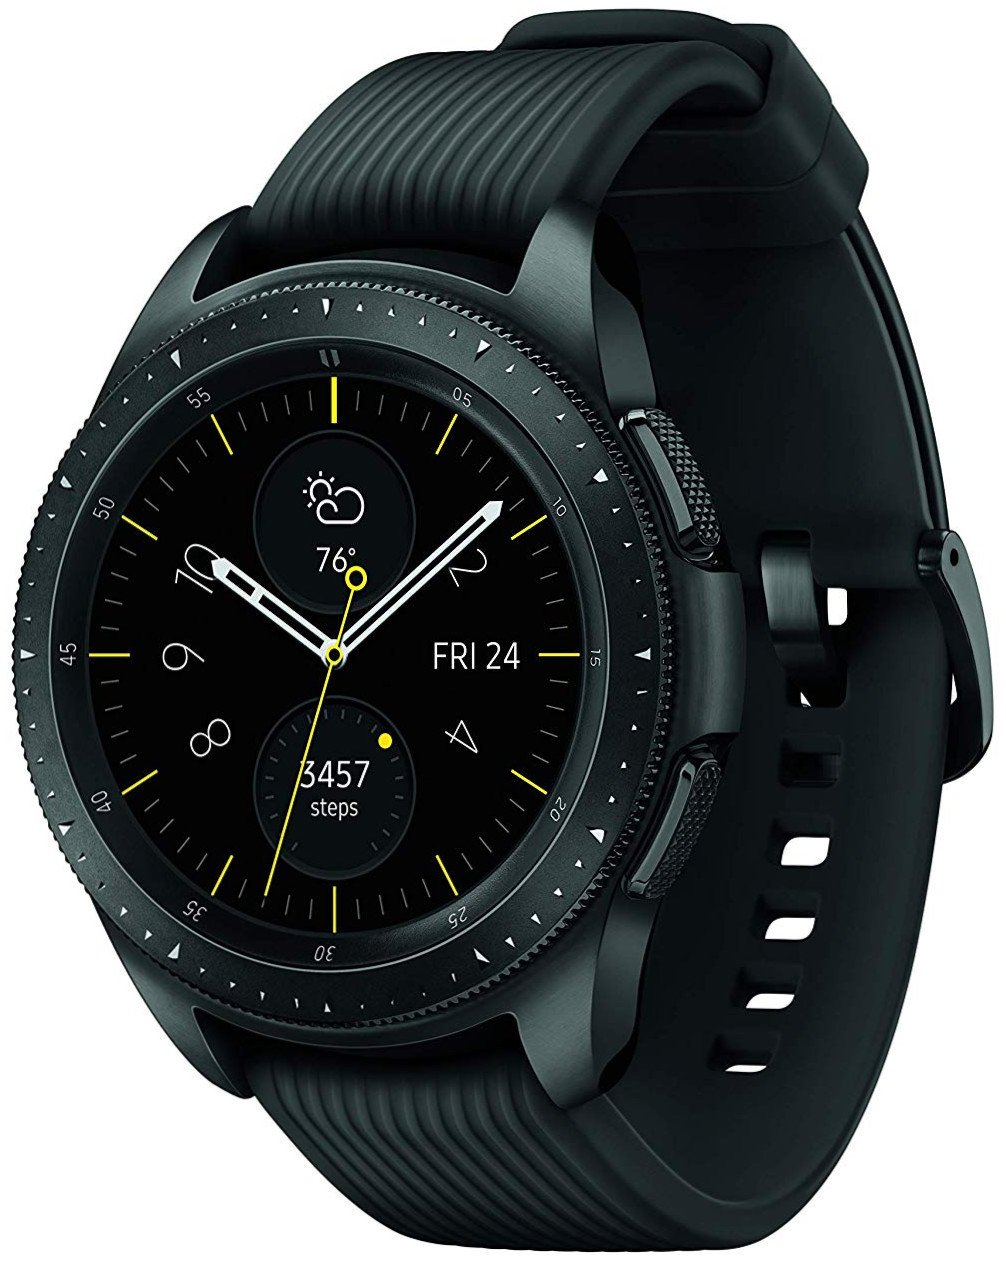 galaxy watch active have a speaker